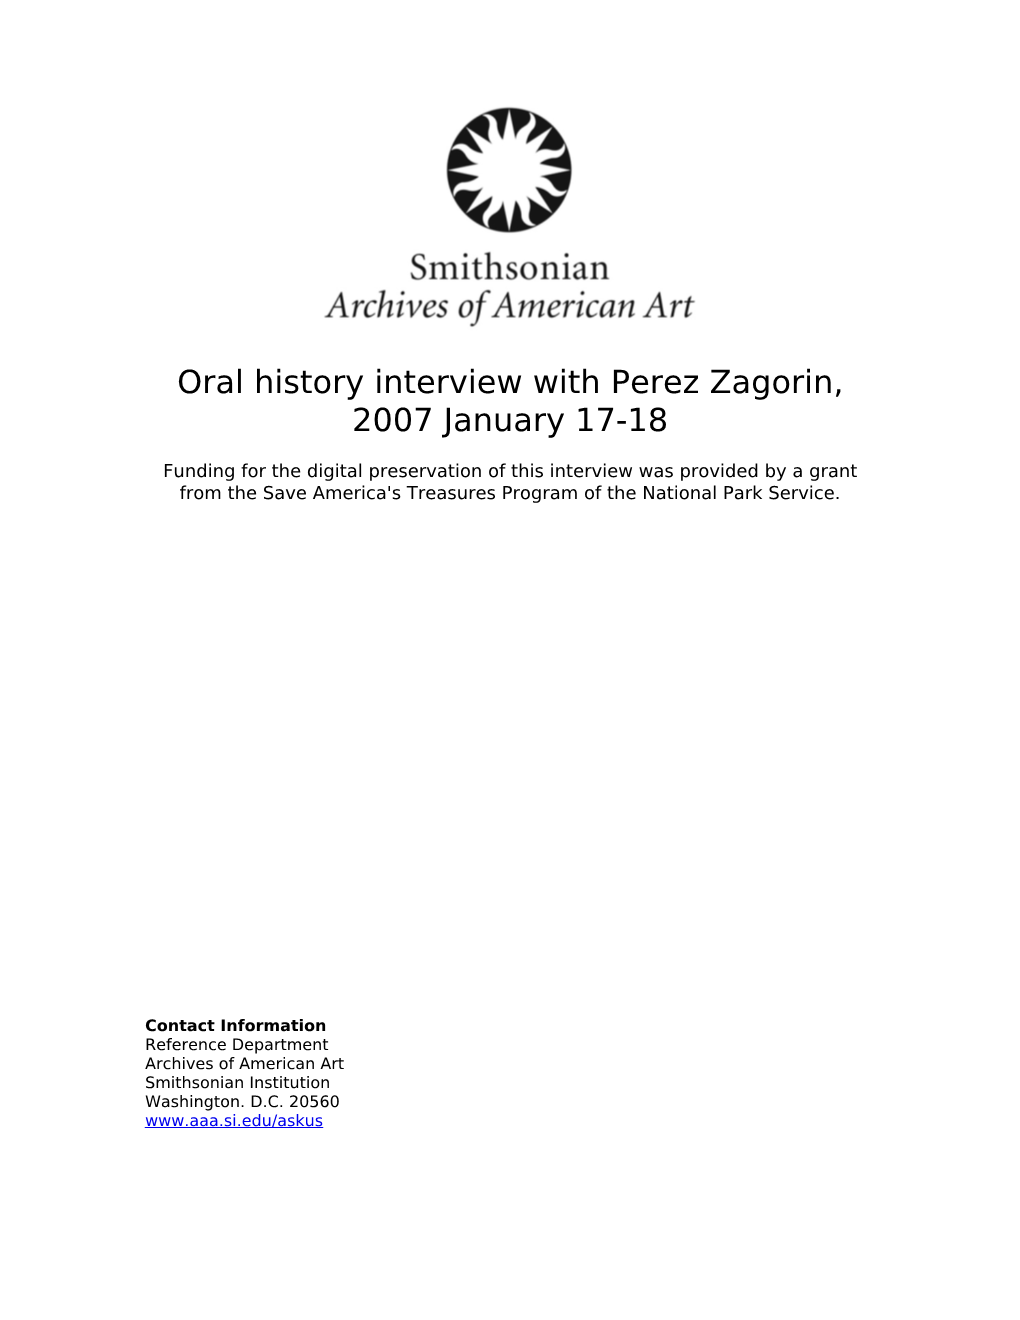 Oral History Interview with Perez Zagorin, 2007 January 17-18